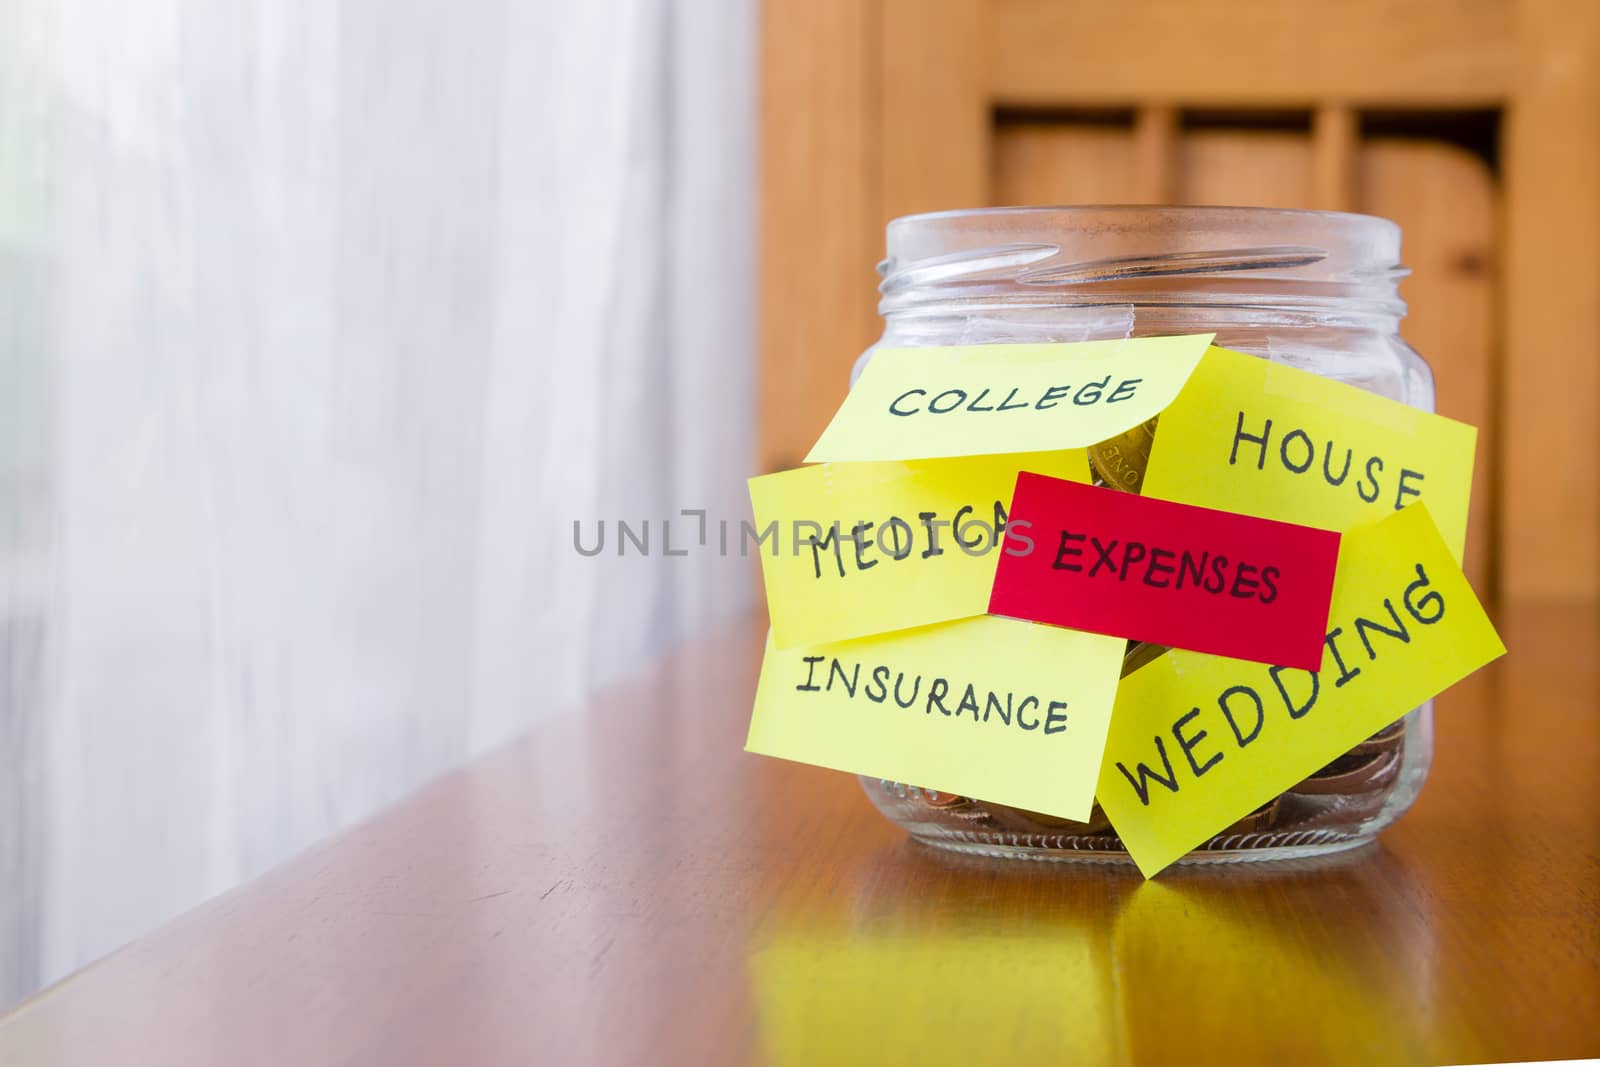 Expenses and orther tags on savings money jar by vinnstock